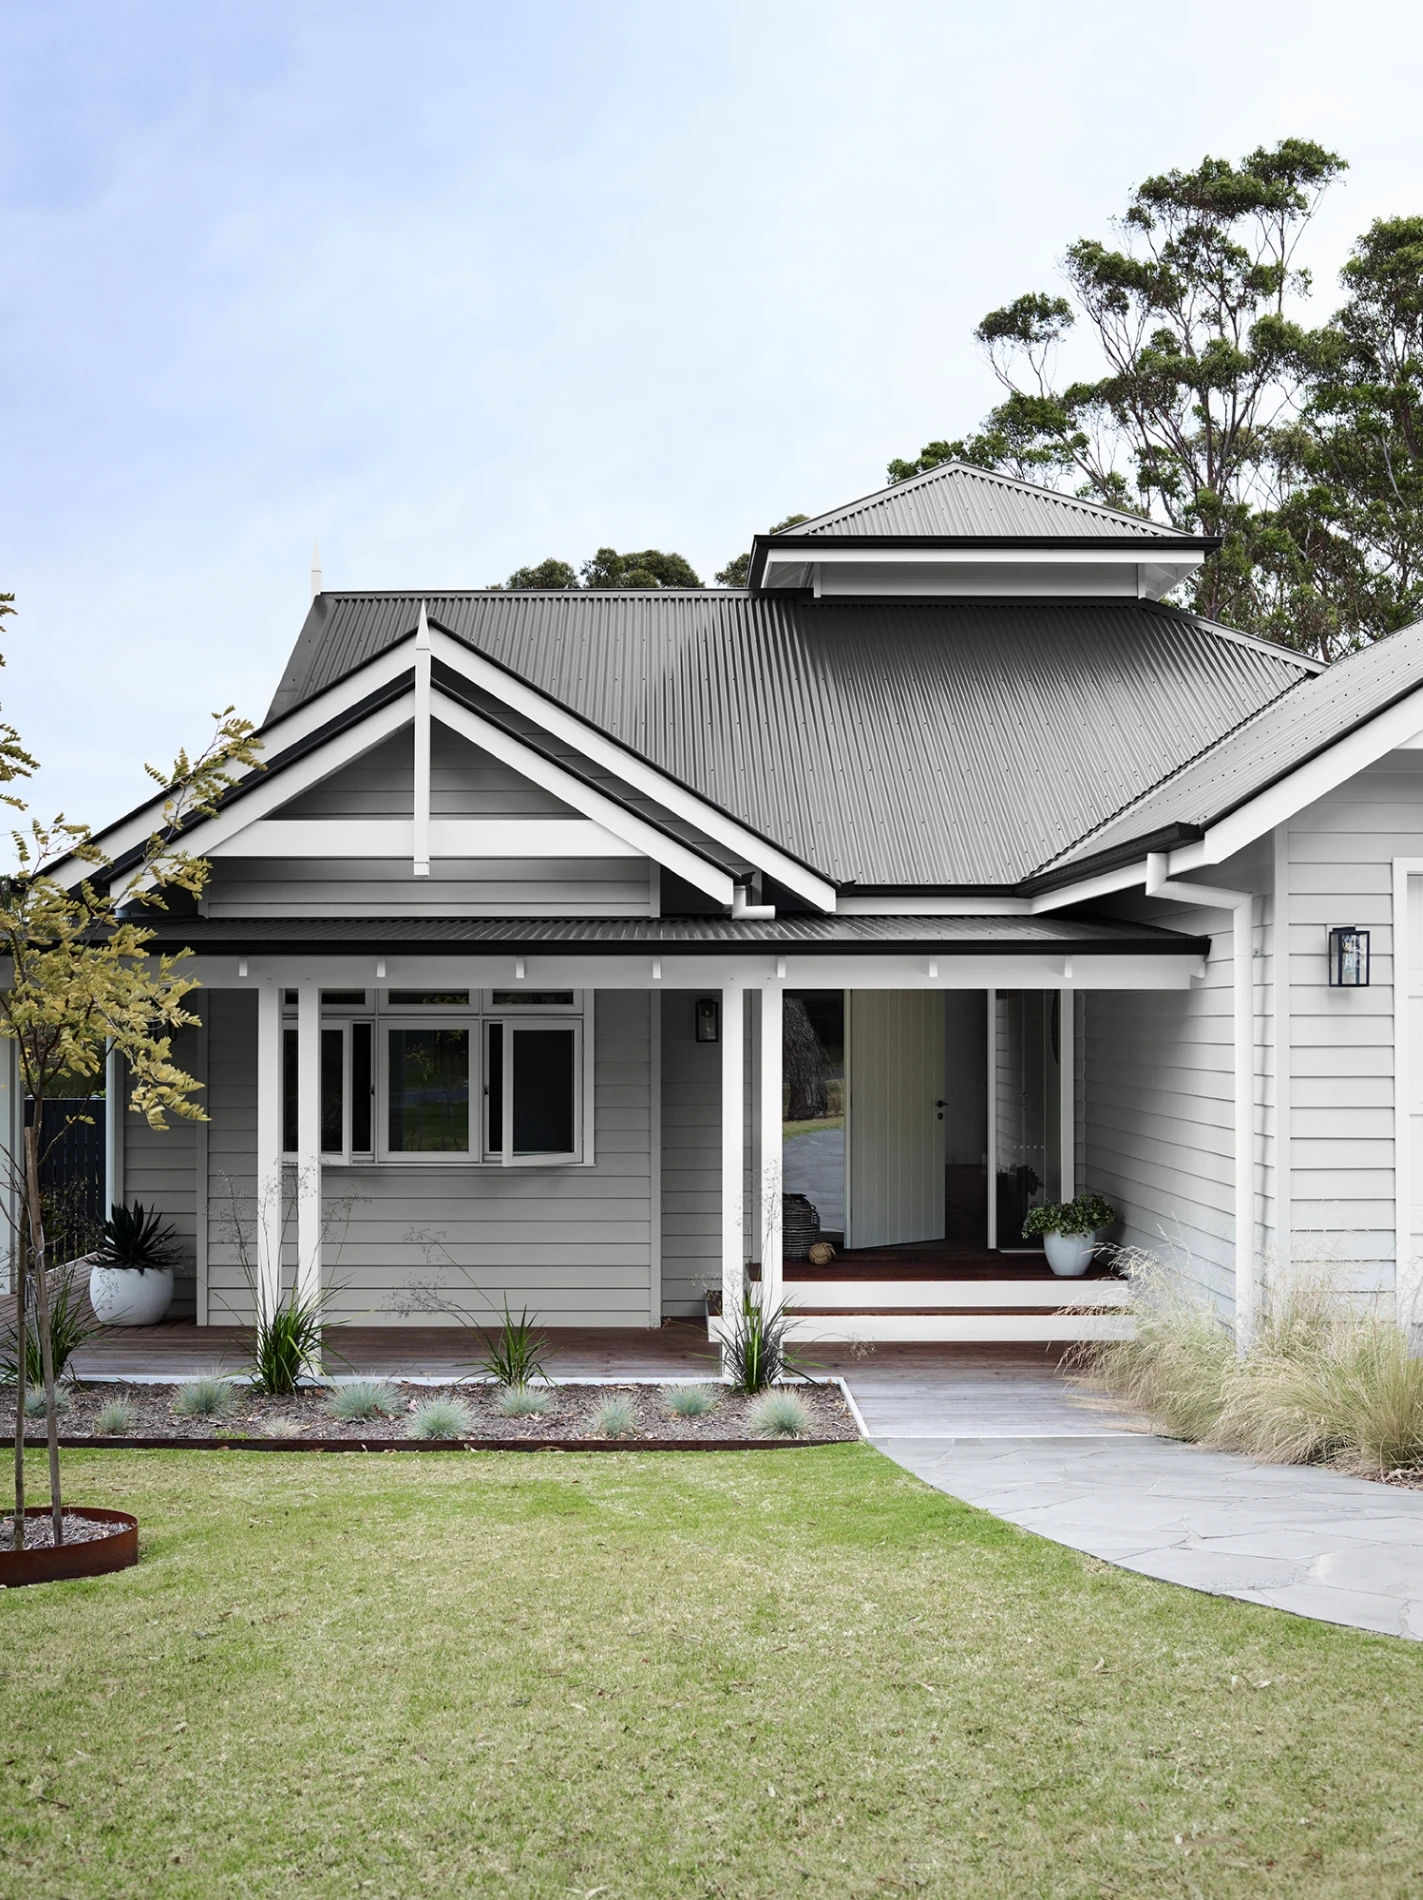 Lyttelton is a popular and complex soft grey with a subtle green undertone. It works well as a main wall colour both inside and out. Pair it with cool whites such as Mt Aspiring and Ōkārito, as well as deeper greys, greens and charcoals such as Lyttelton Double, Ōhai, Glendhu Bay and Castlecliff.
